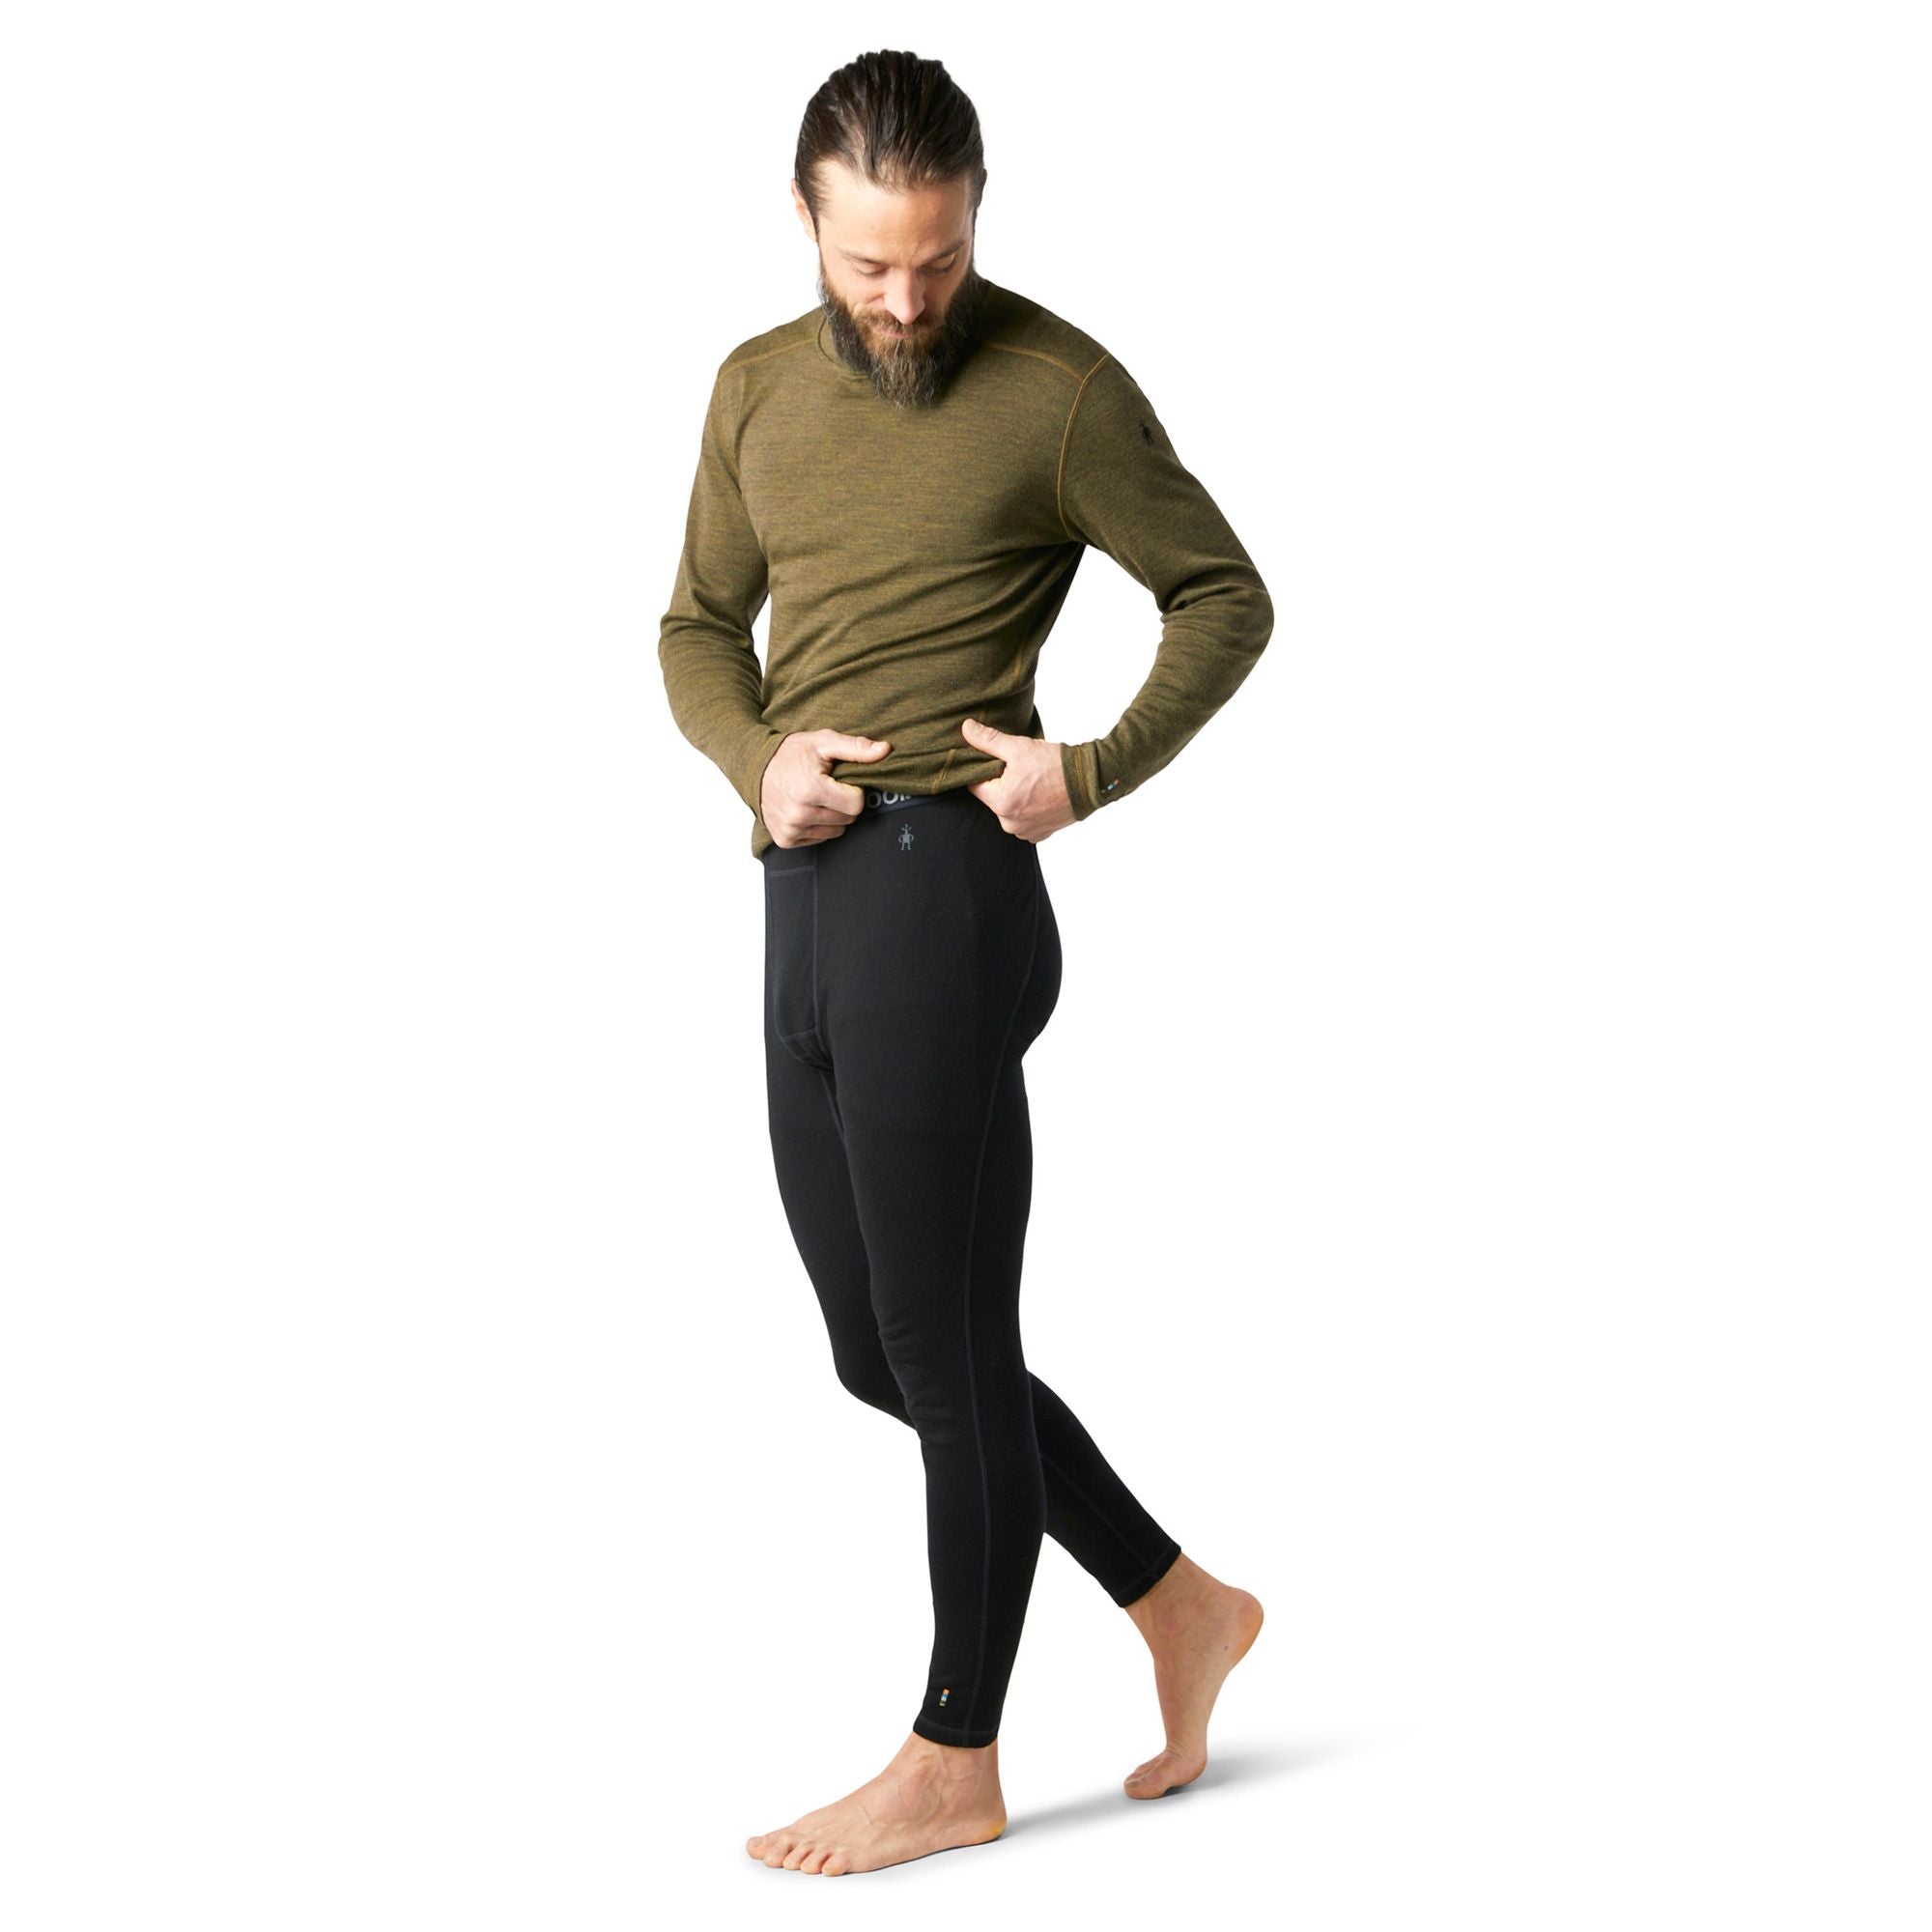 3/4 Leggings Thermal Breathable Winter Sports Baselayer – PNX 34